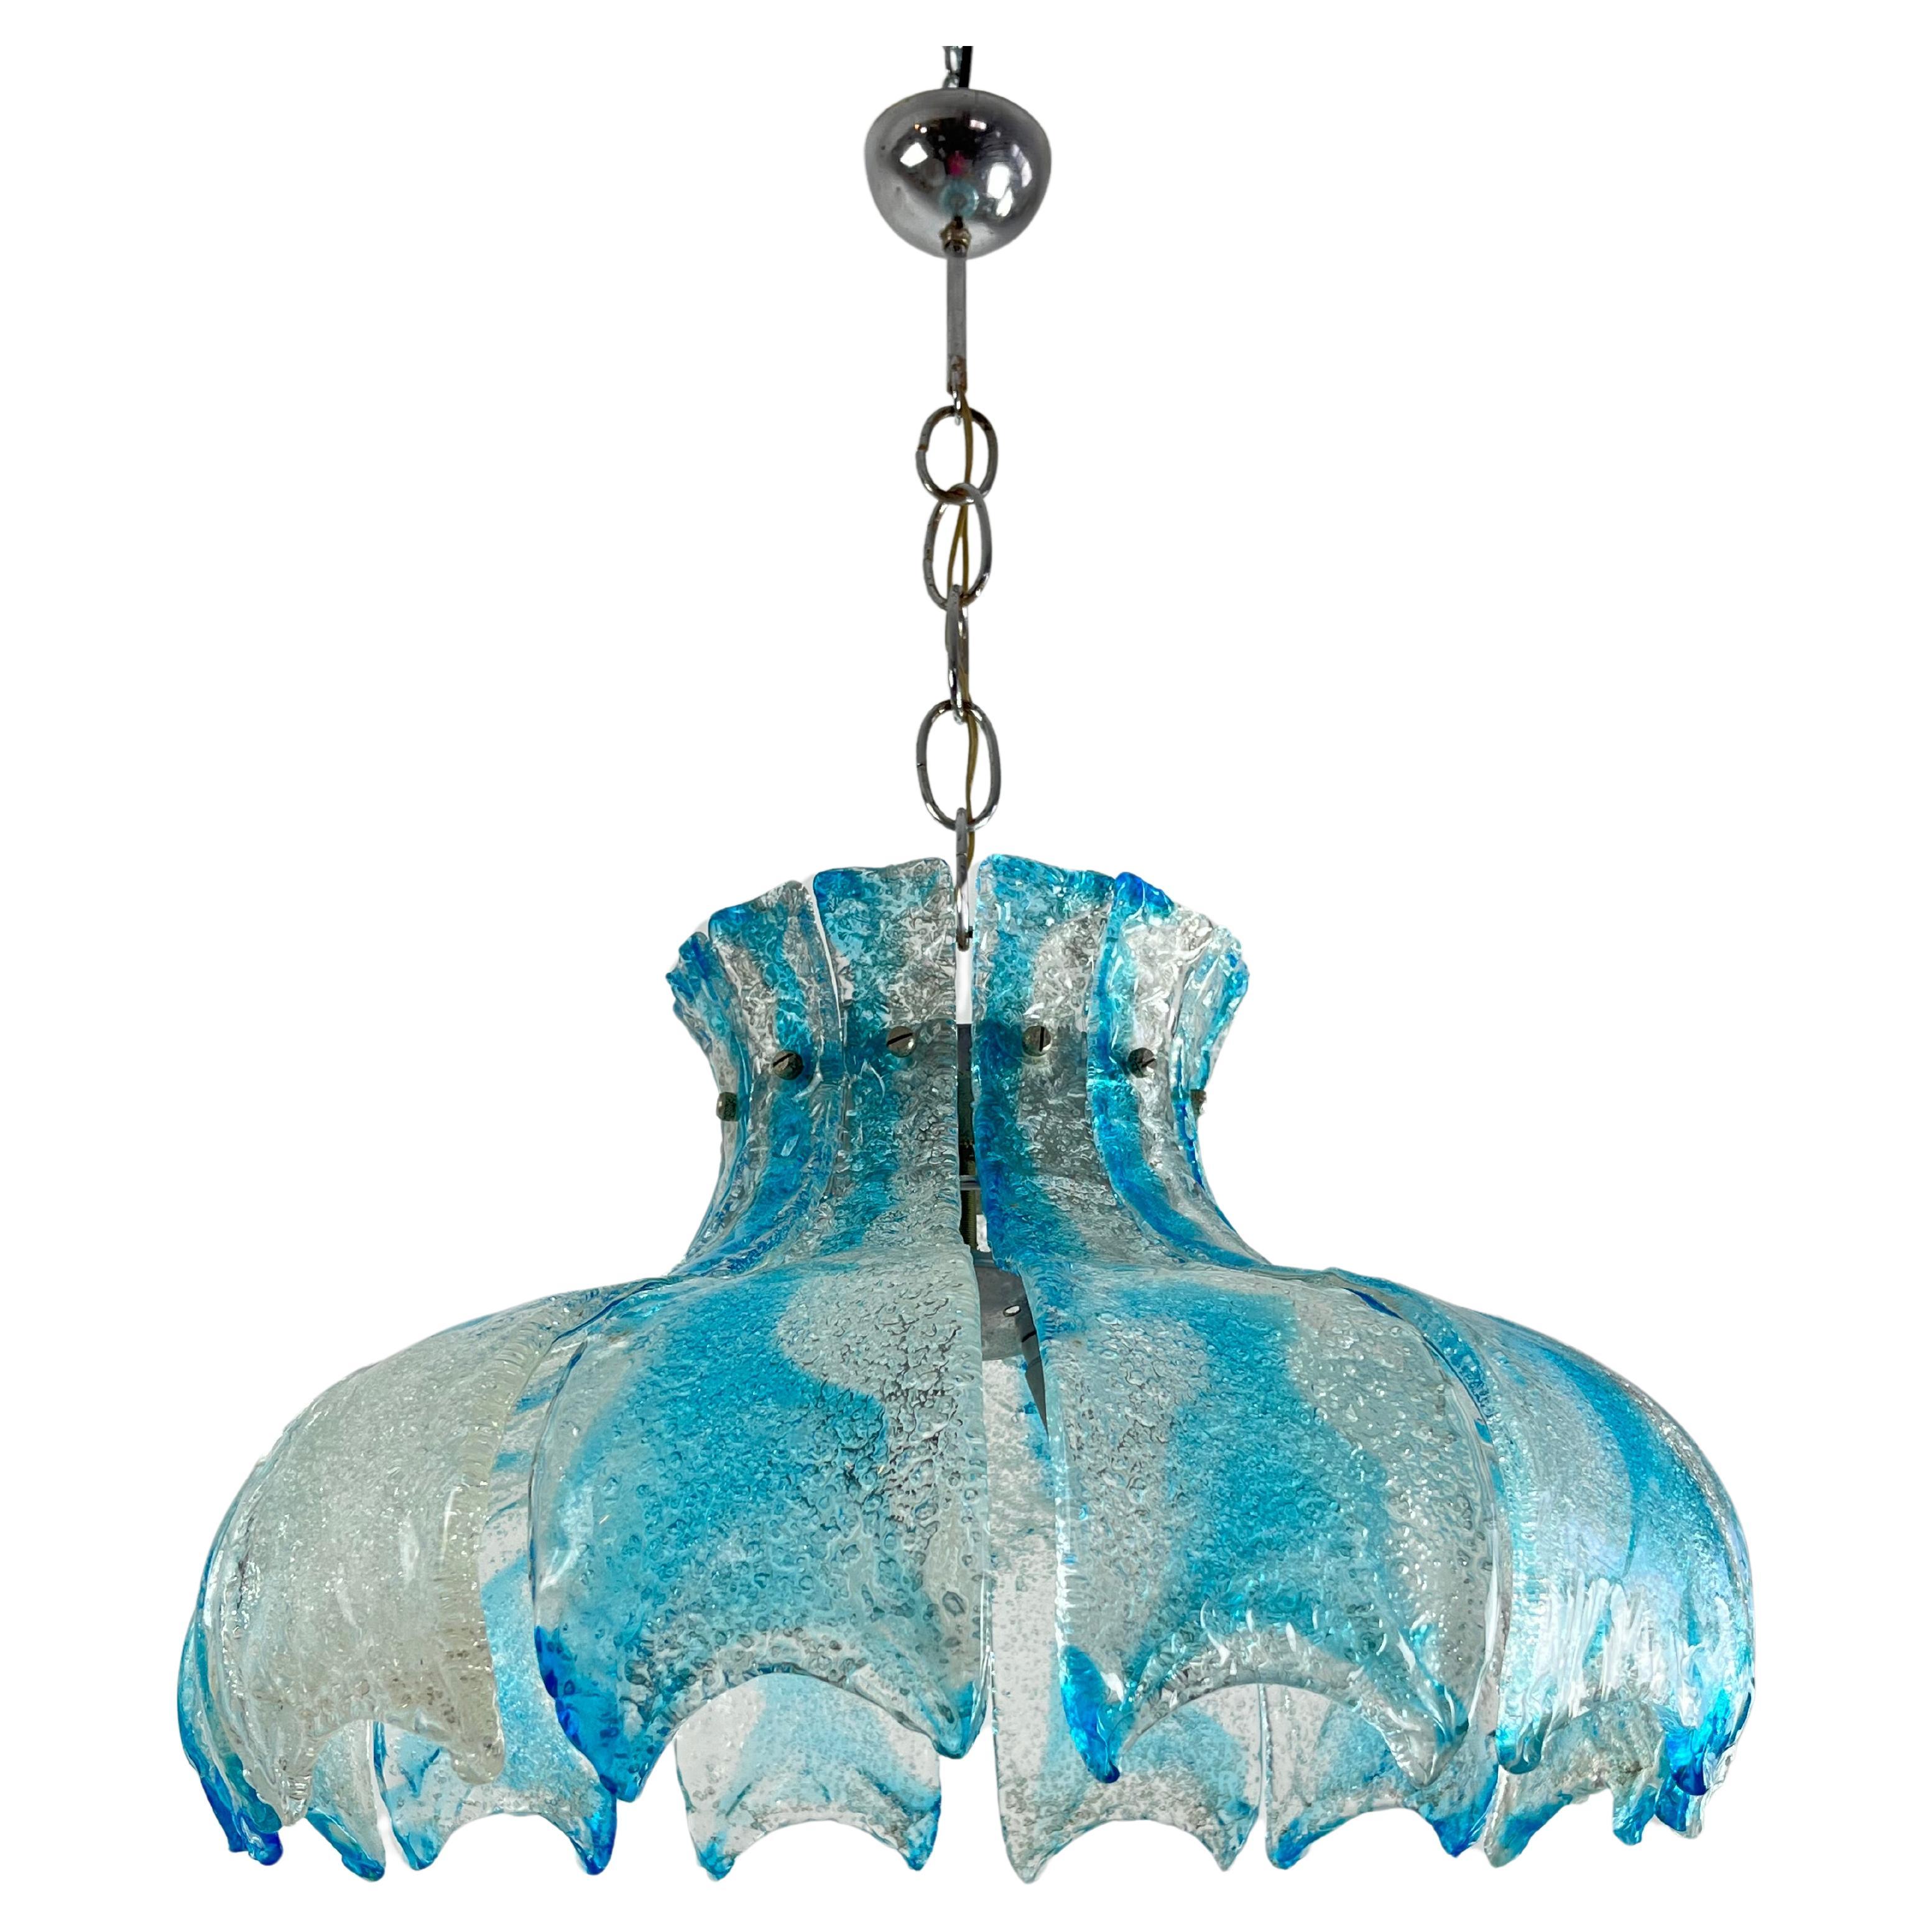 Large Mid-Century Murano Glass Chandelier By Carlo Nason For Mazzega 1960s